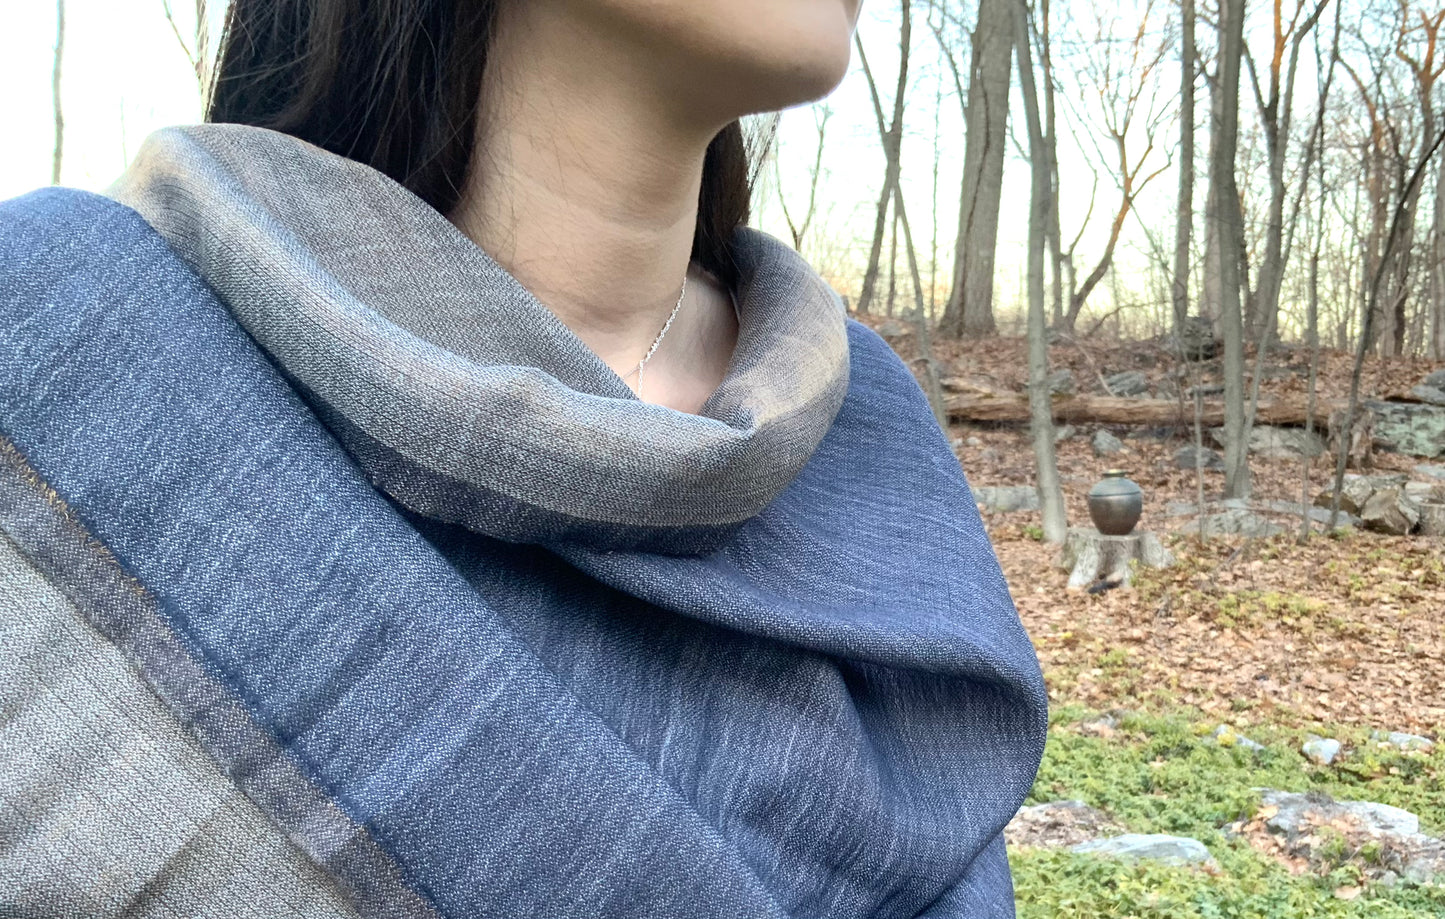 Two tone Kashmir shawl in Blue and Grey #TwoToneKashmirShawl #TrendingShawl #KashmirShawl - DharBazaar